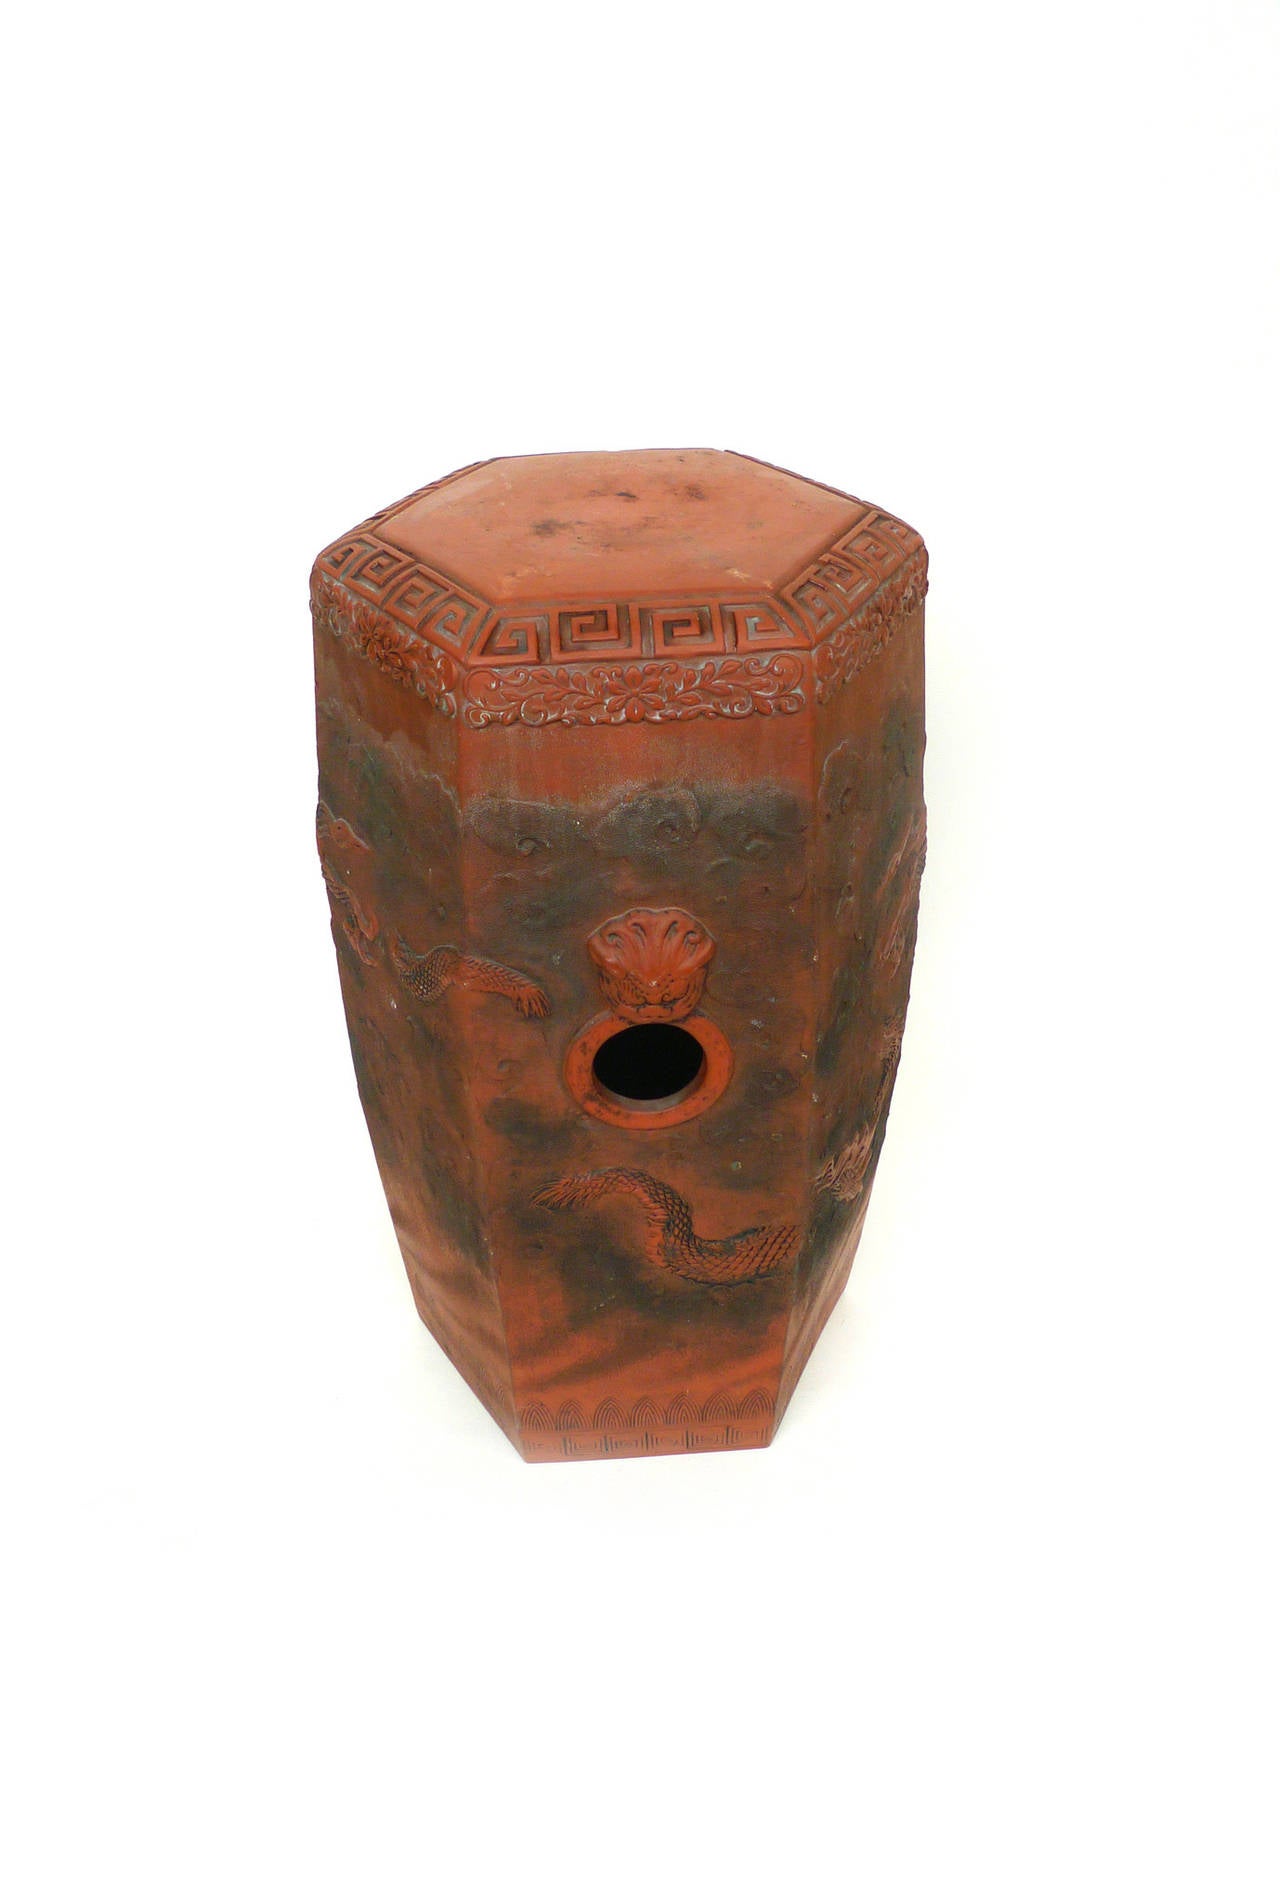 This Chinese garden seat is a beautiful red terracotta. It has a hexagonal, cylindrical shape and elaborate, richly textured designs, which include a dragon encircling the circumference, and Meander and other linear patterns.